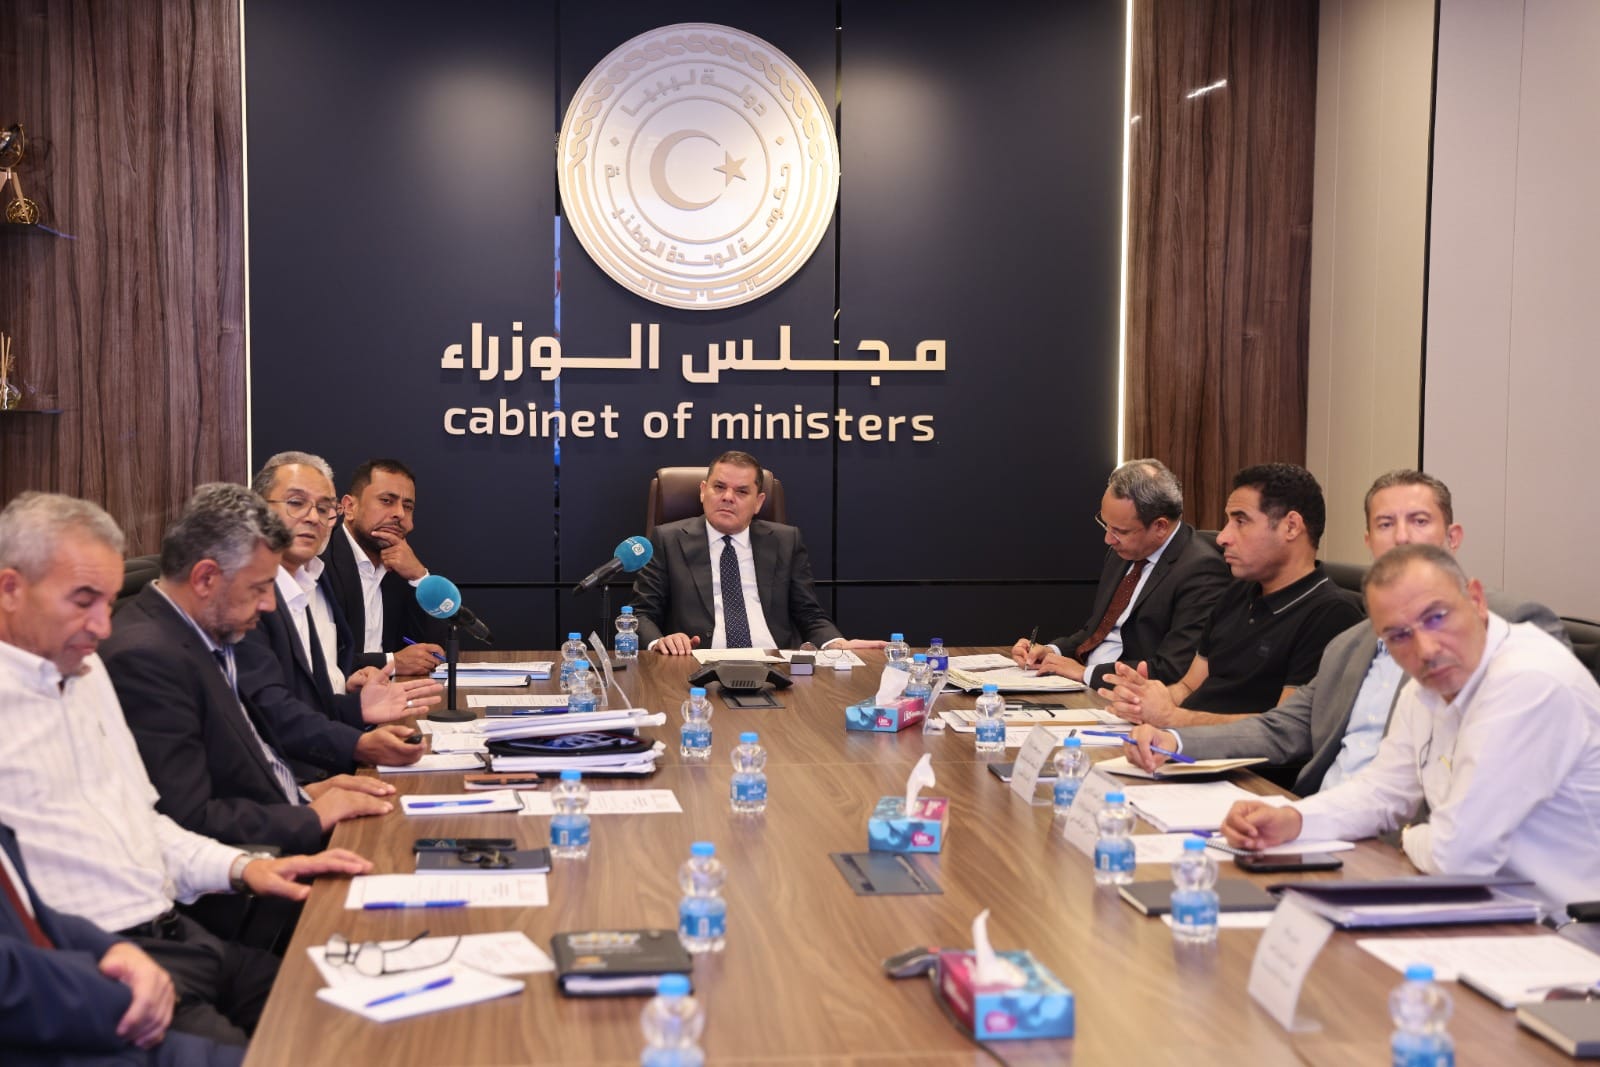 Al-Dbaiba stresses the need to unify efforts among institutions related to water supply.